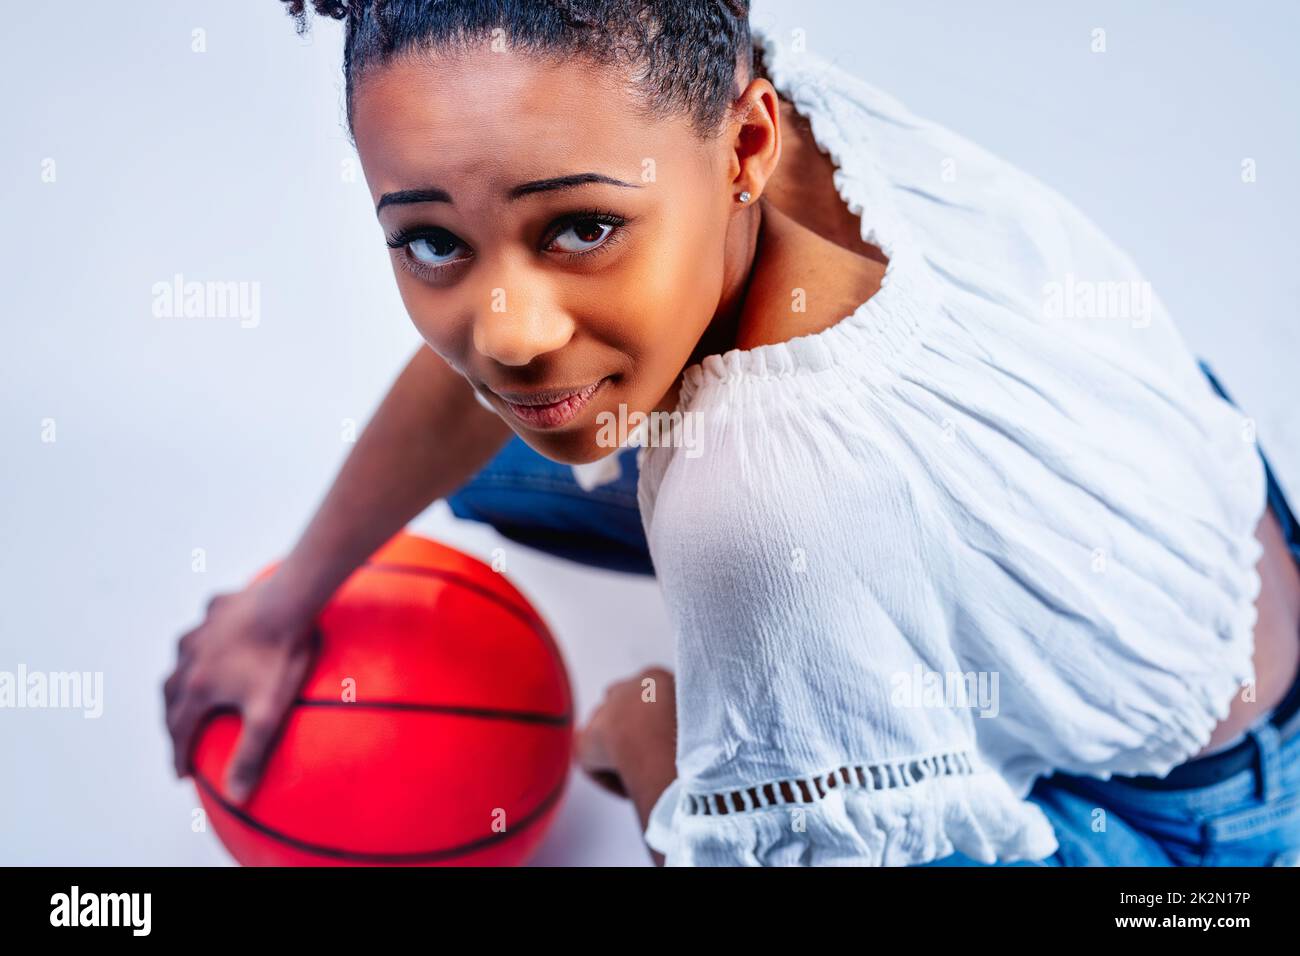 Athletic young Black woman crouching down over a red ball Stock Photo